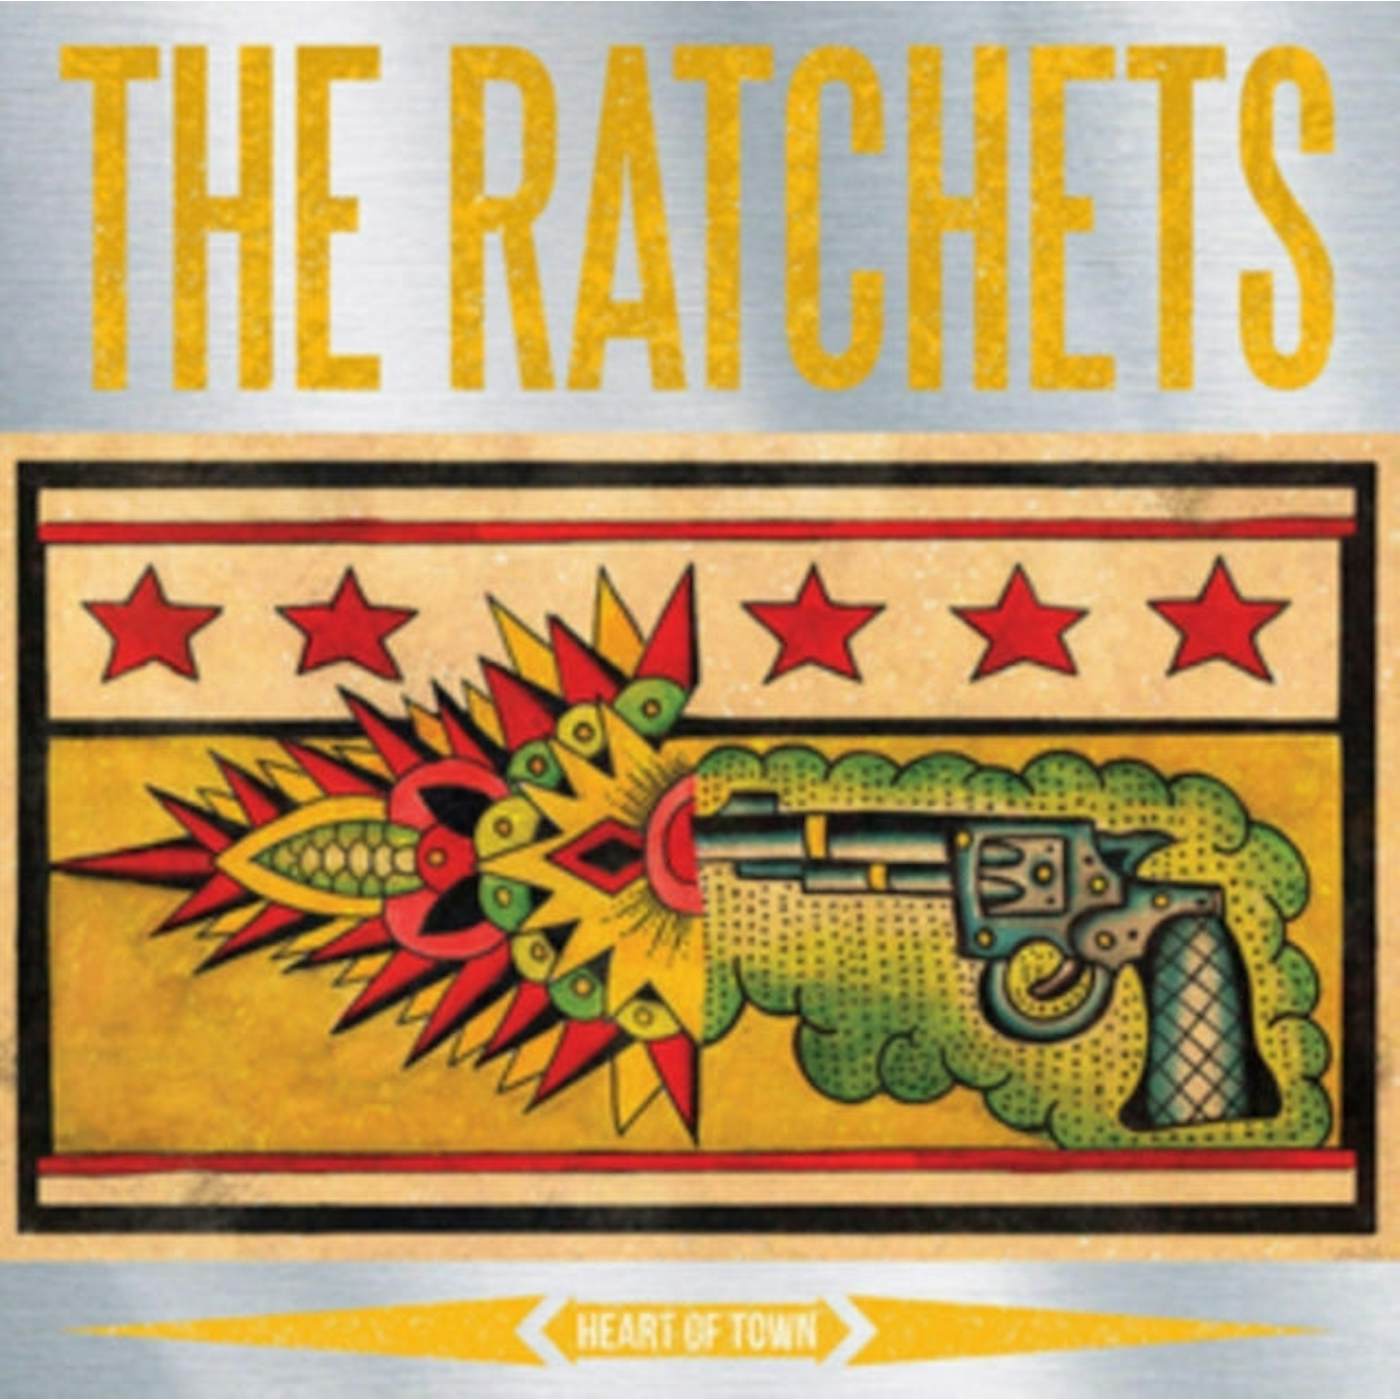 The Ratchets LP - Heart Of Town (Coloured Vinyl)